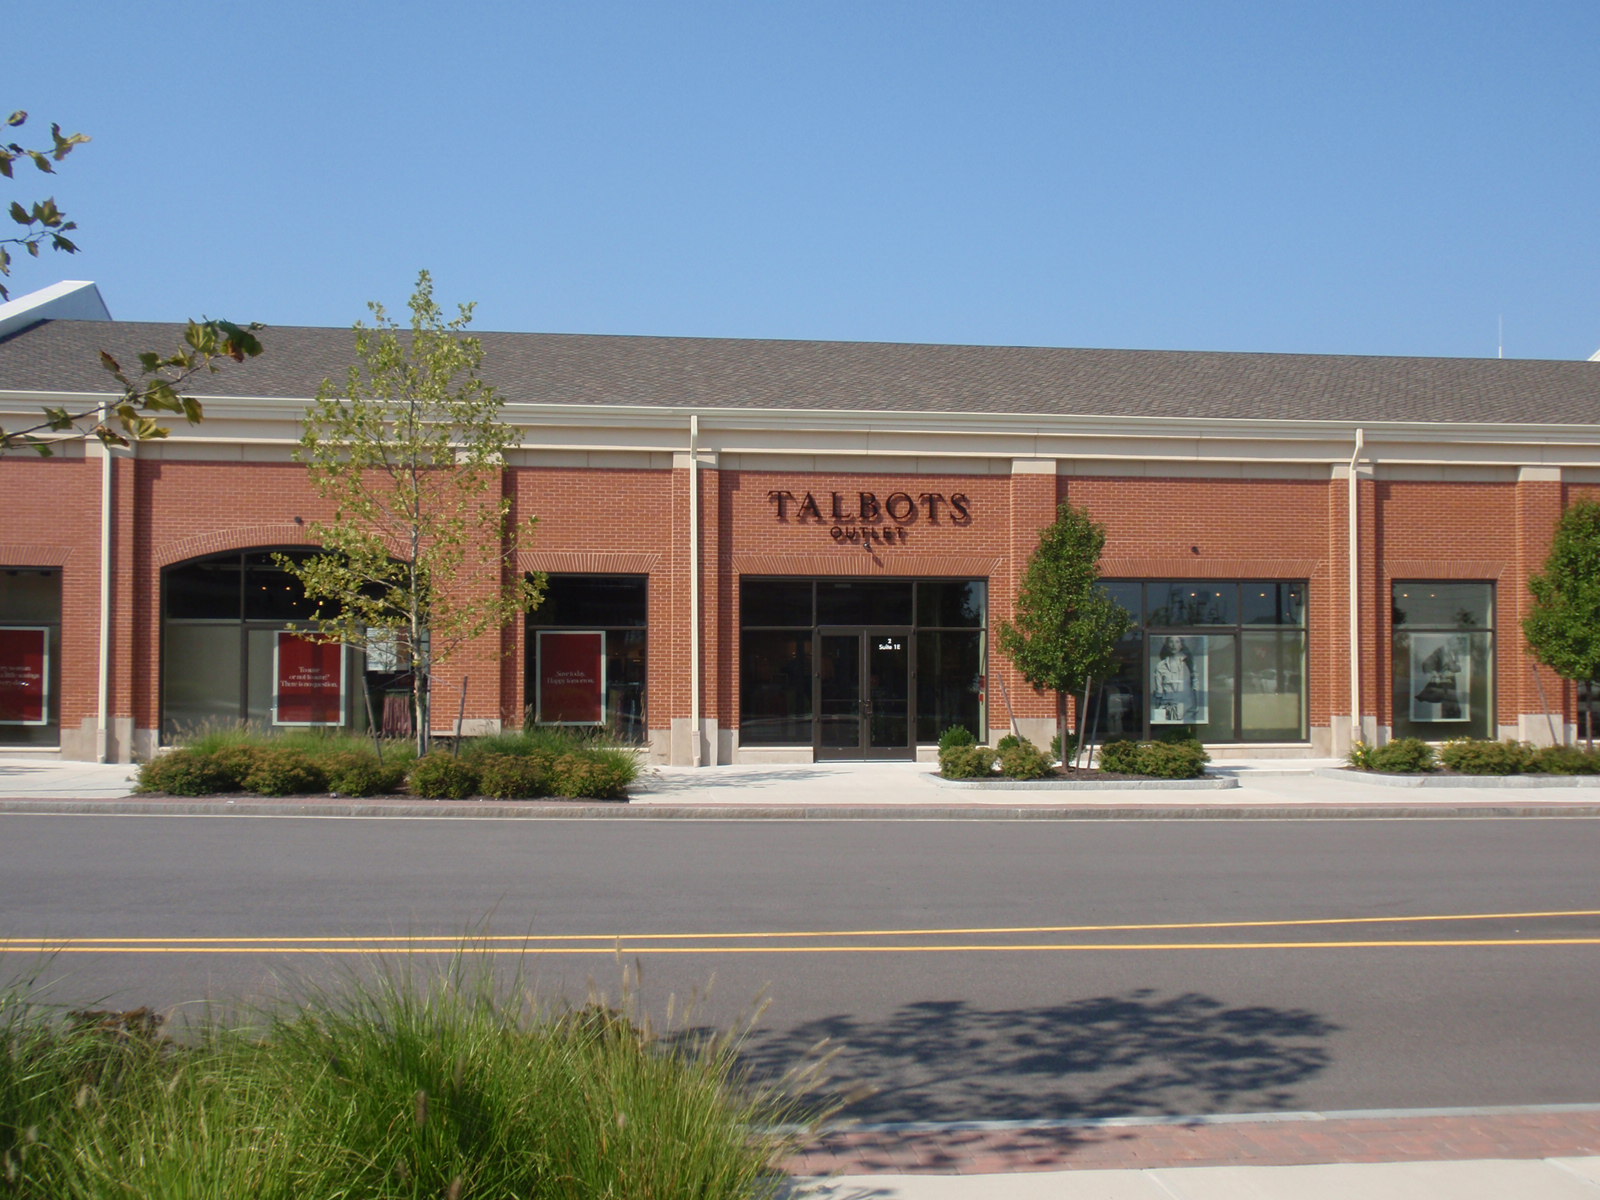 Talbots Outlet